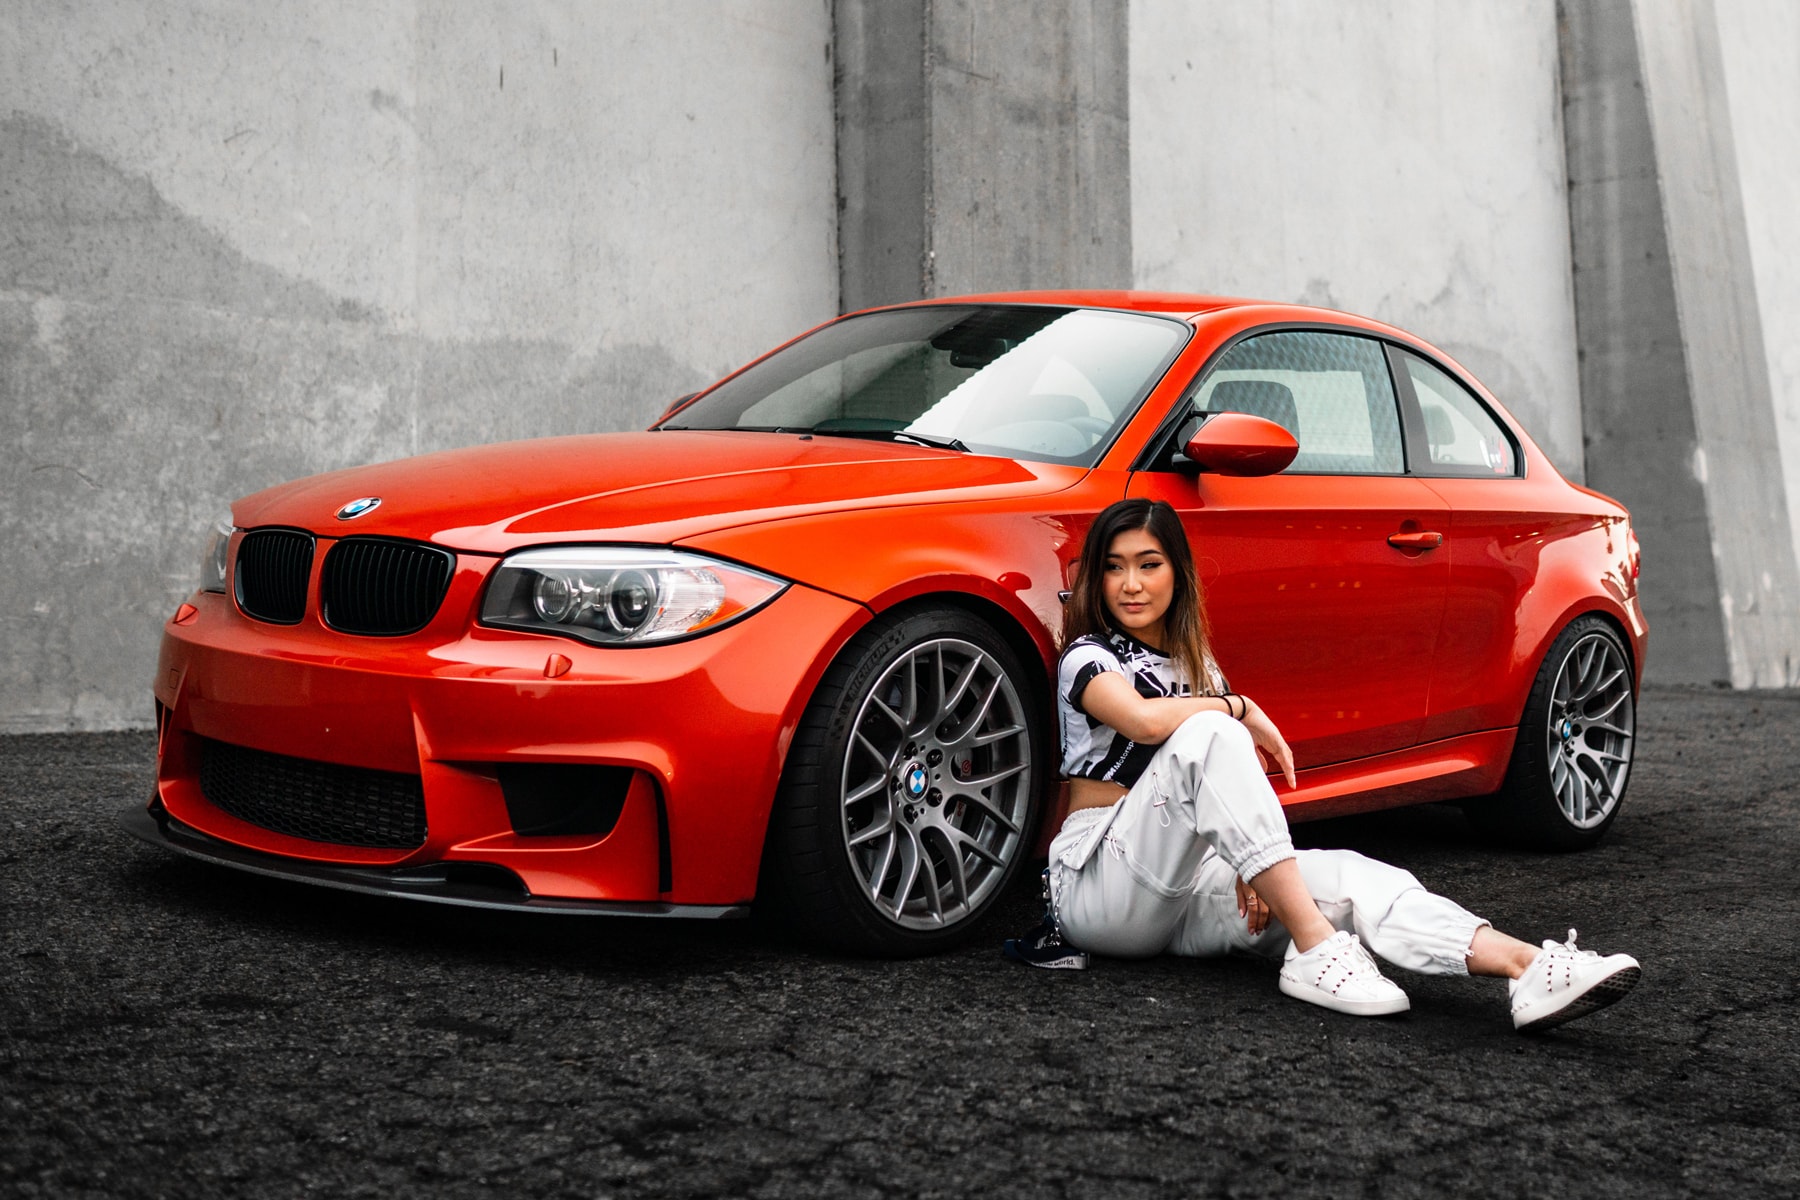 DRIVERS: Pro Racer Samantha Tan and Her BMW 1M Coupe